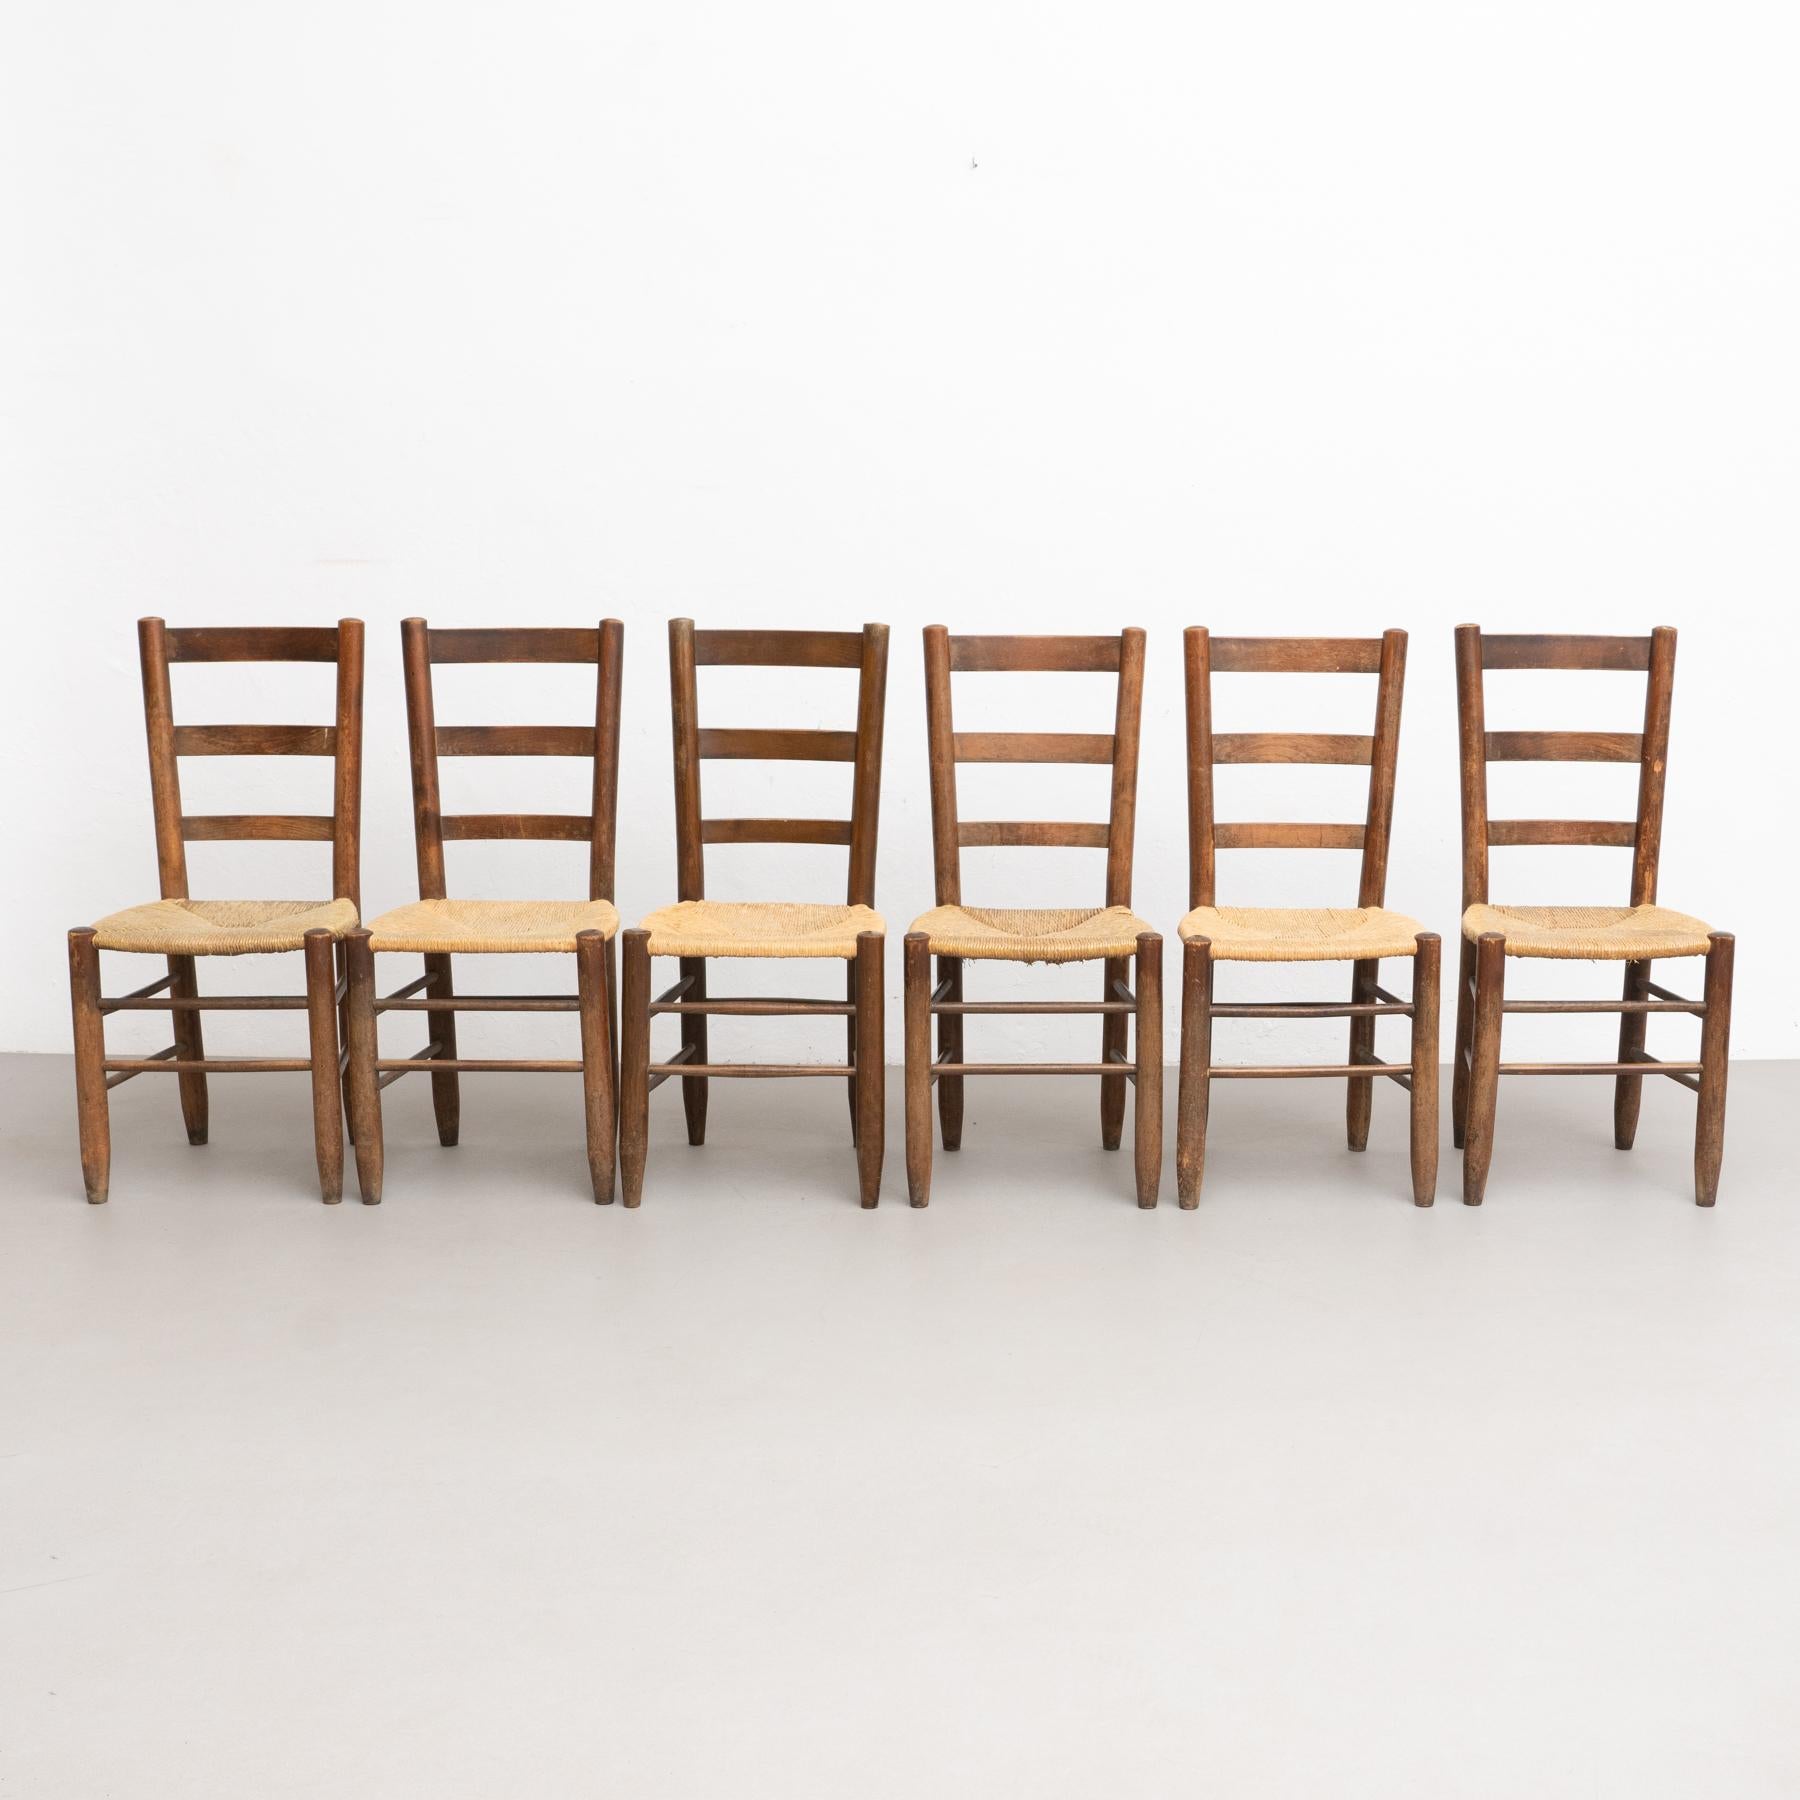 Set of 6 n.19 chair designed by Charlotte Perriand, made by unknown manufacturer.

Circa 1950, France.

Materials
Beech wood.
Rattan.

In good original condition, with minor wear consistent with age and use, preserving a beautiful patina.